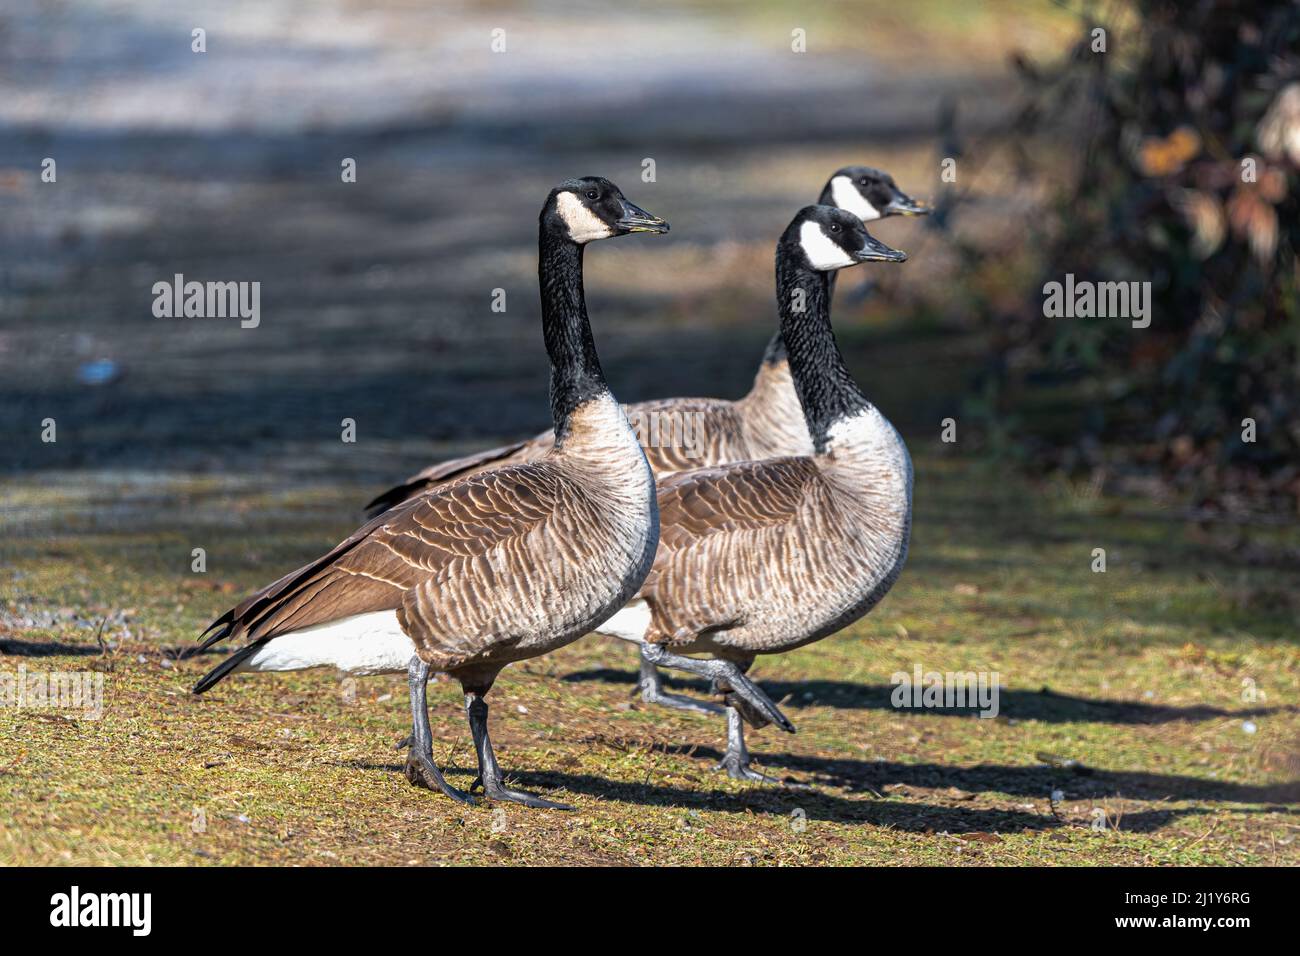 Three Canada Geese (Branta canadensis) on the Watch Stock Photo